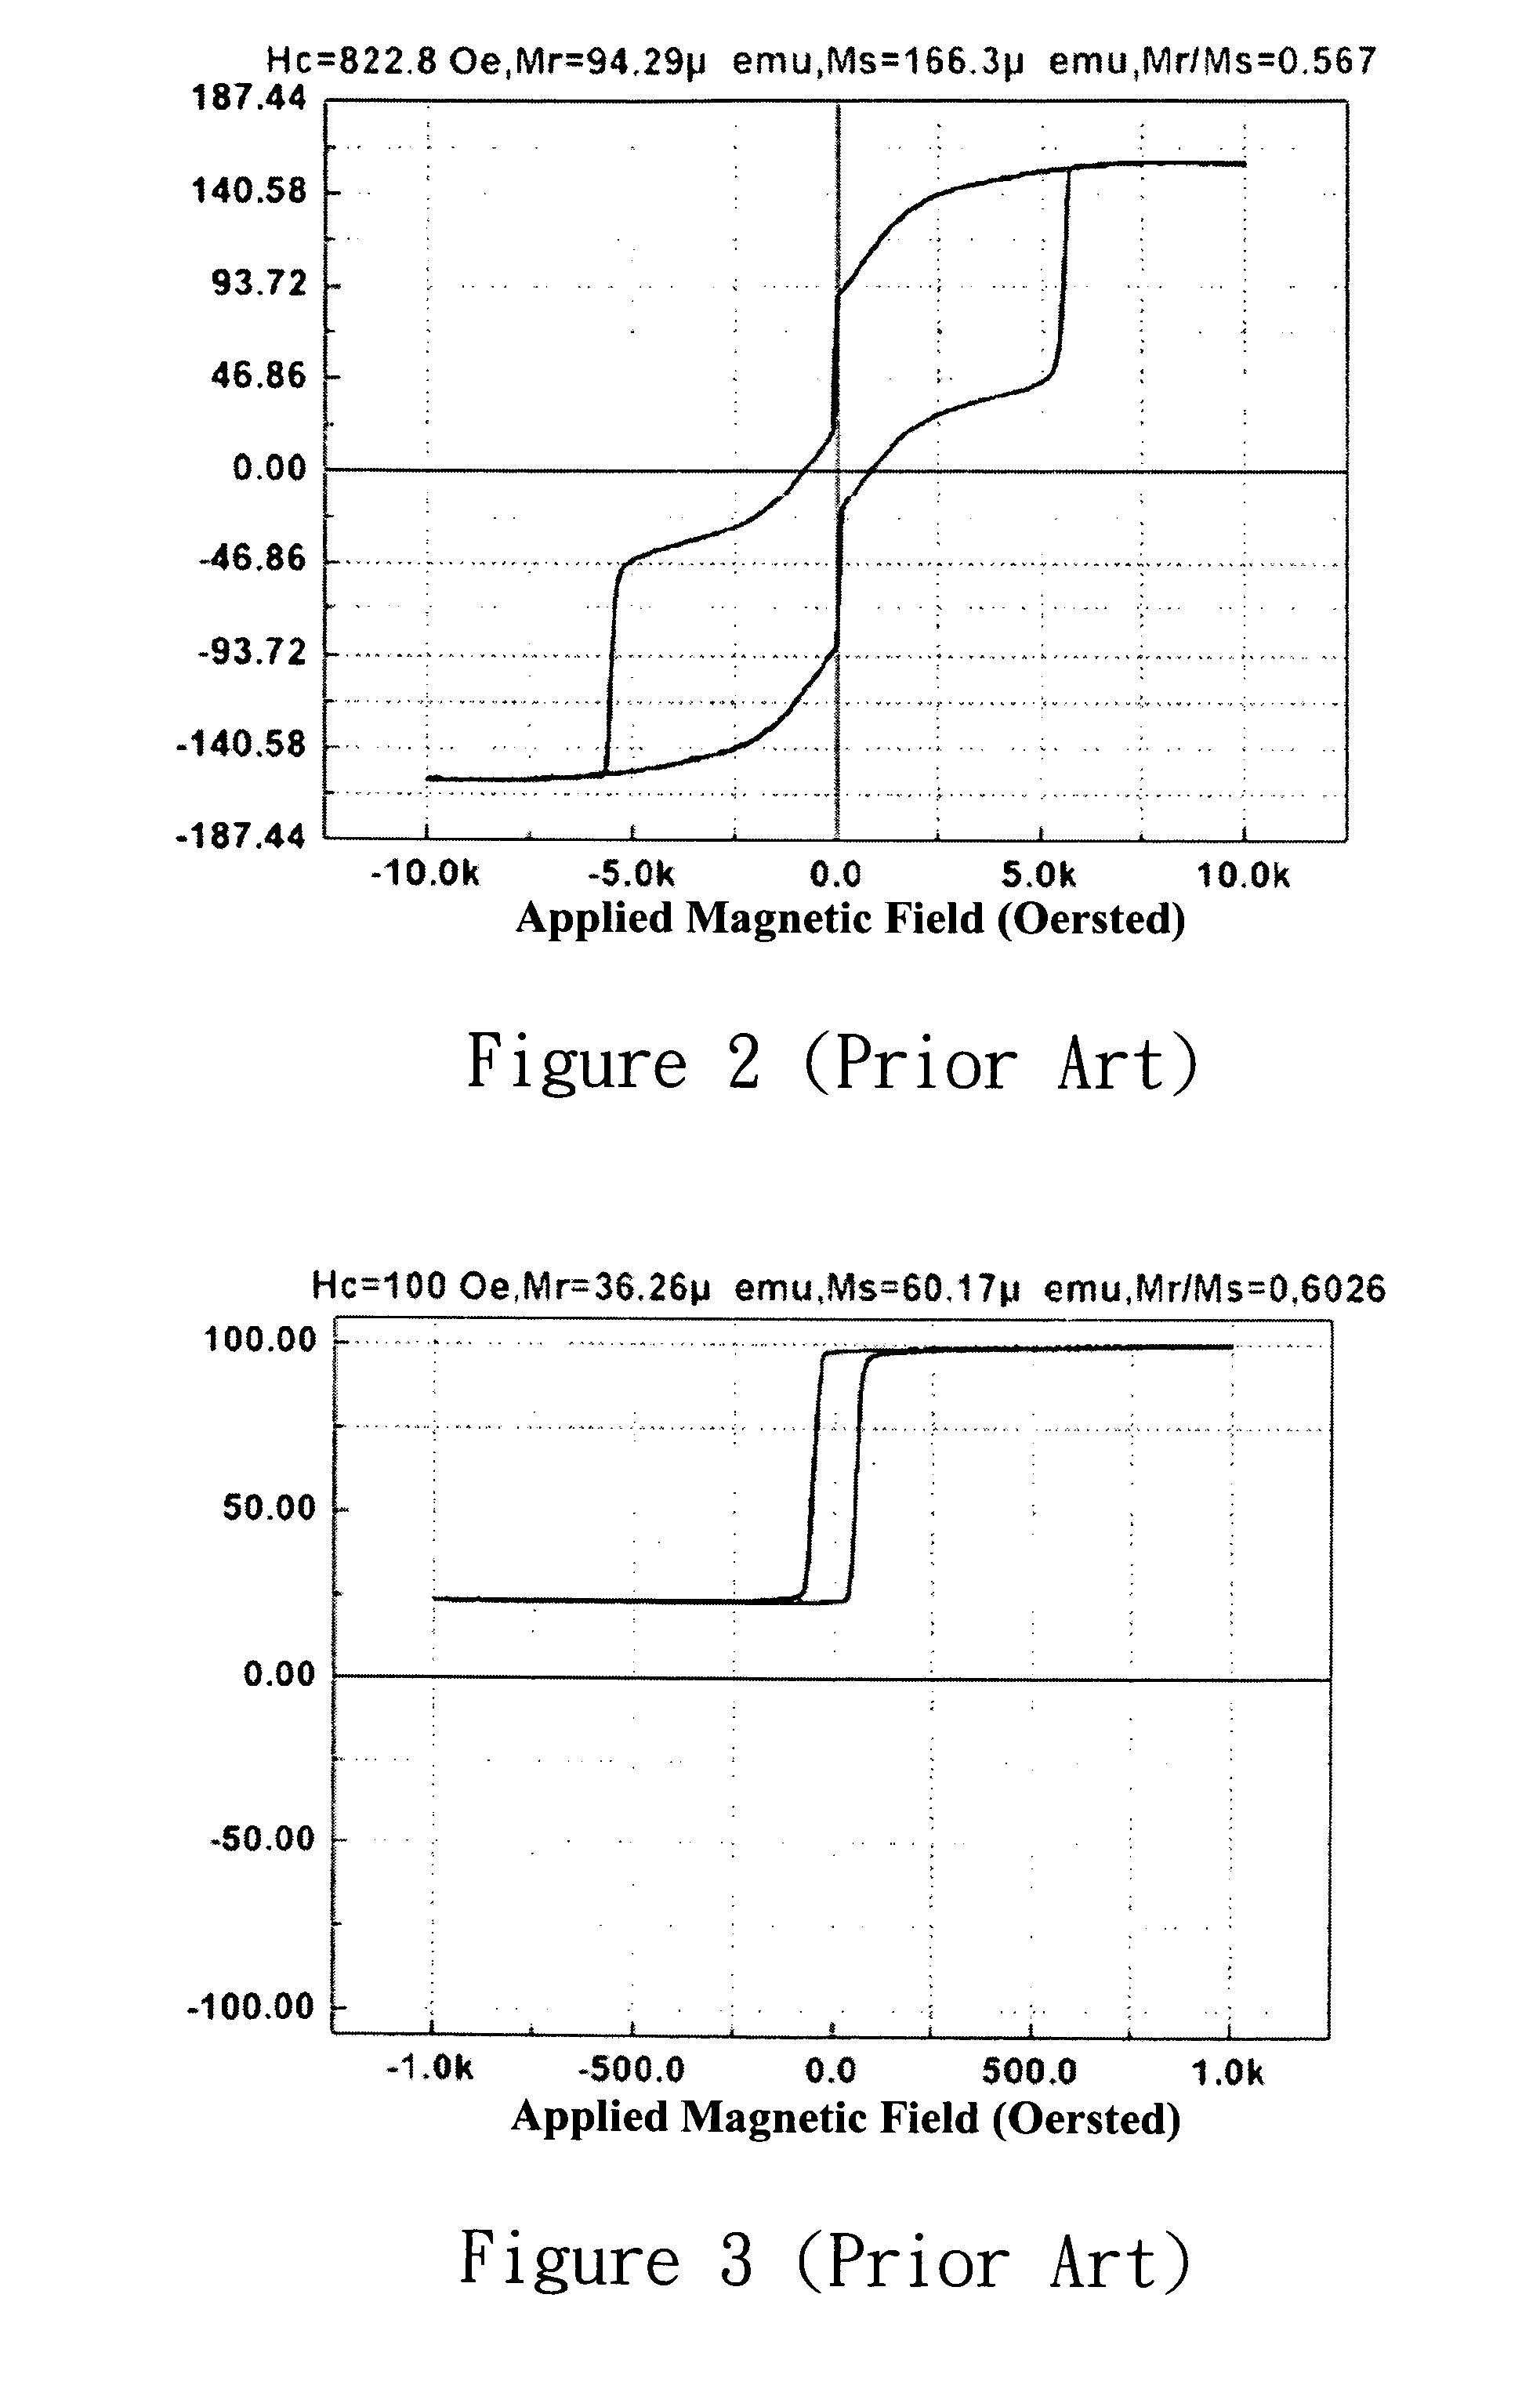 Magnetic tunneling junction structure for magnetic random access memory